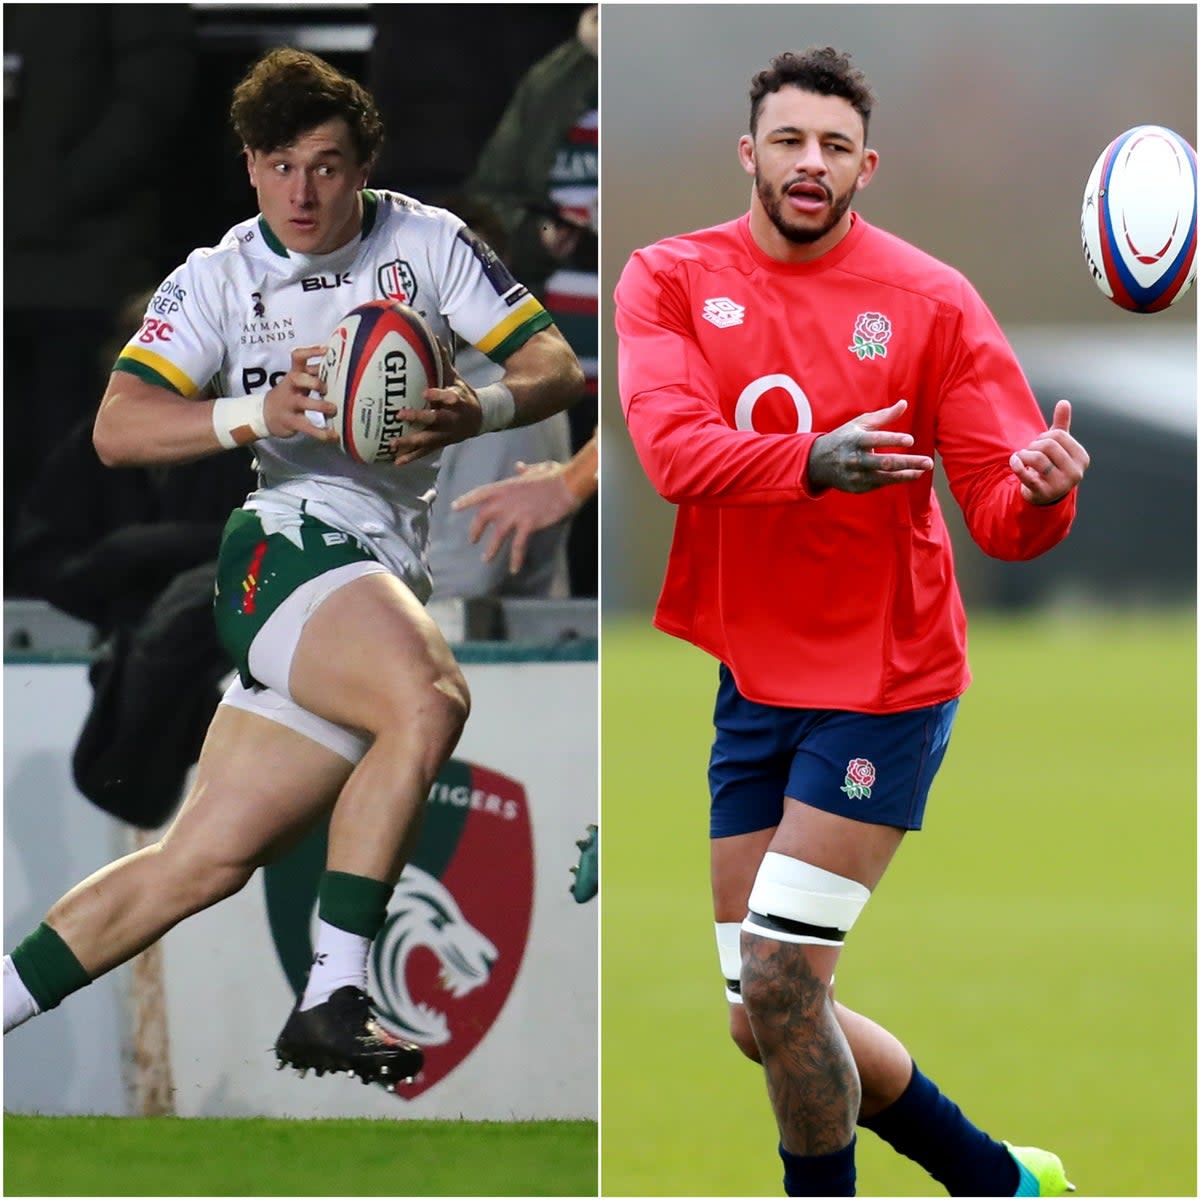 Henry Arundell, left, is in the mix in an England team captained by Courtney Lawes, right (Simon Marper/Dave Rogers/PA)